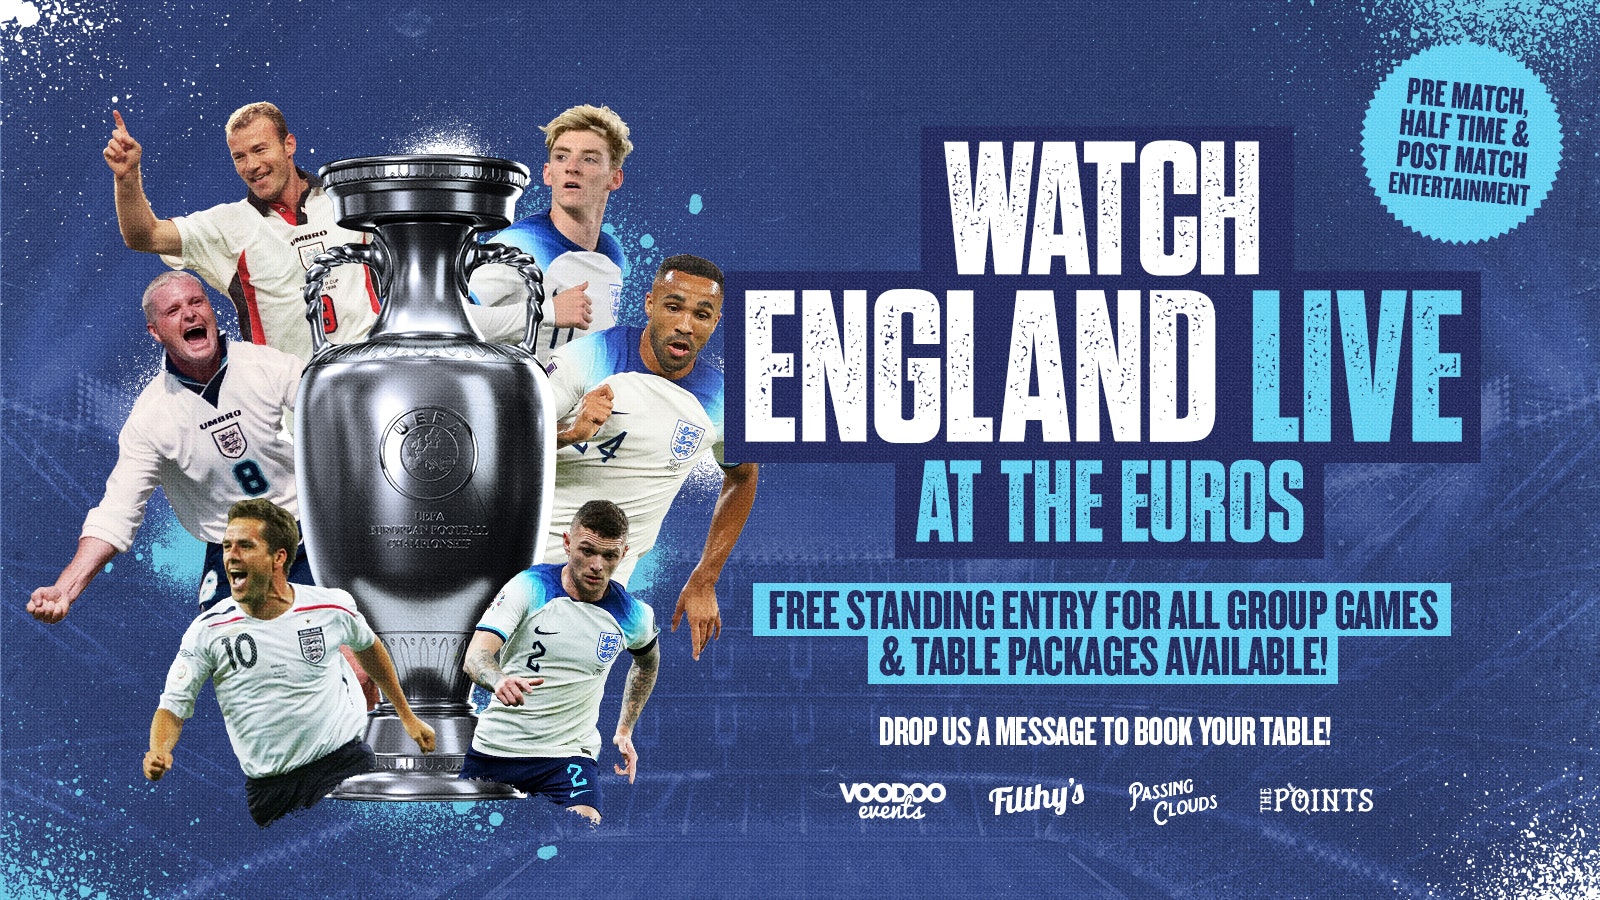 IT’S COMING HOME! – England Vs Serbia! LIVE @ Filthys! 🏴󠁧󠁢󠁥󠁮󠁧󠁿